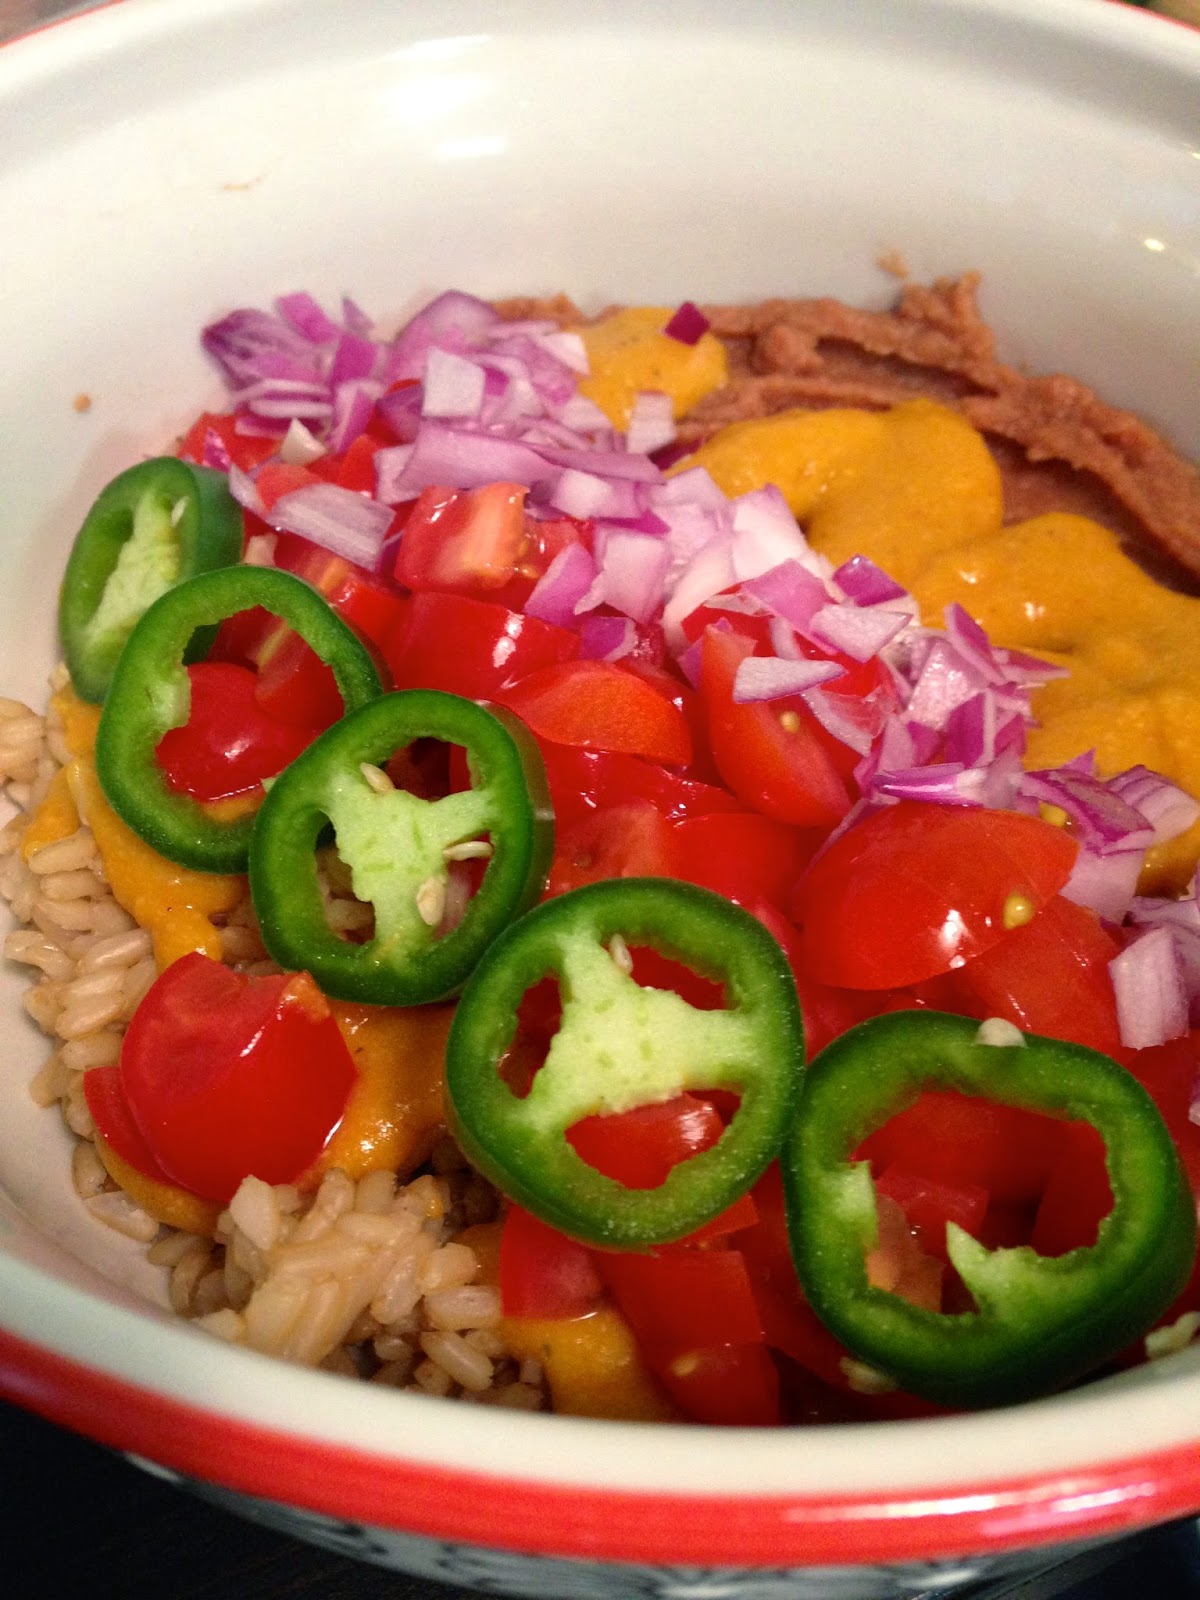 Healthy 10 Minute Mexican Lunch Bowl with Queso Sauce - Vegan, Gluten Free, Soy Free